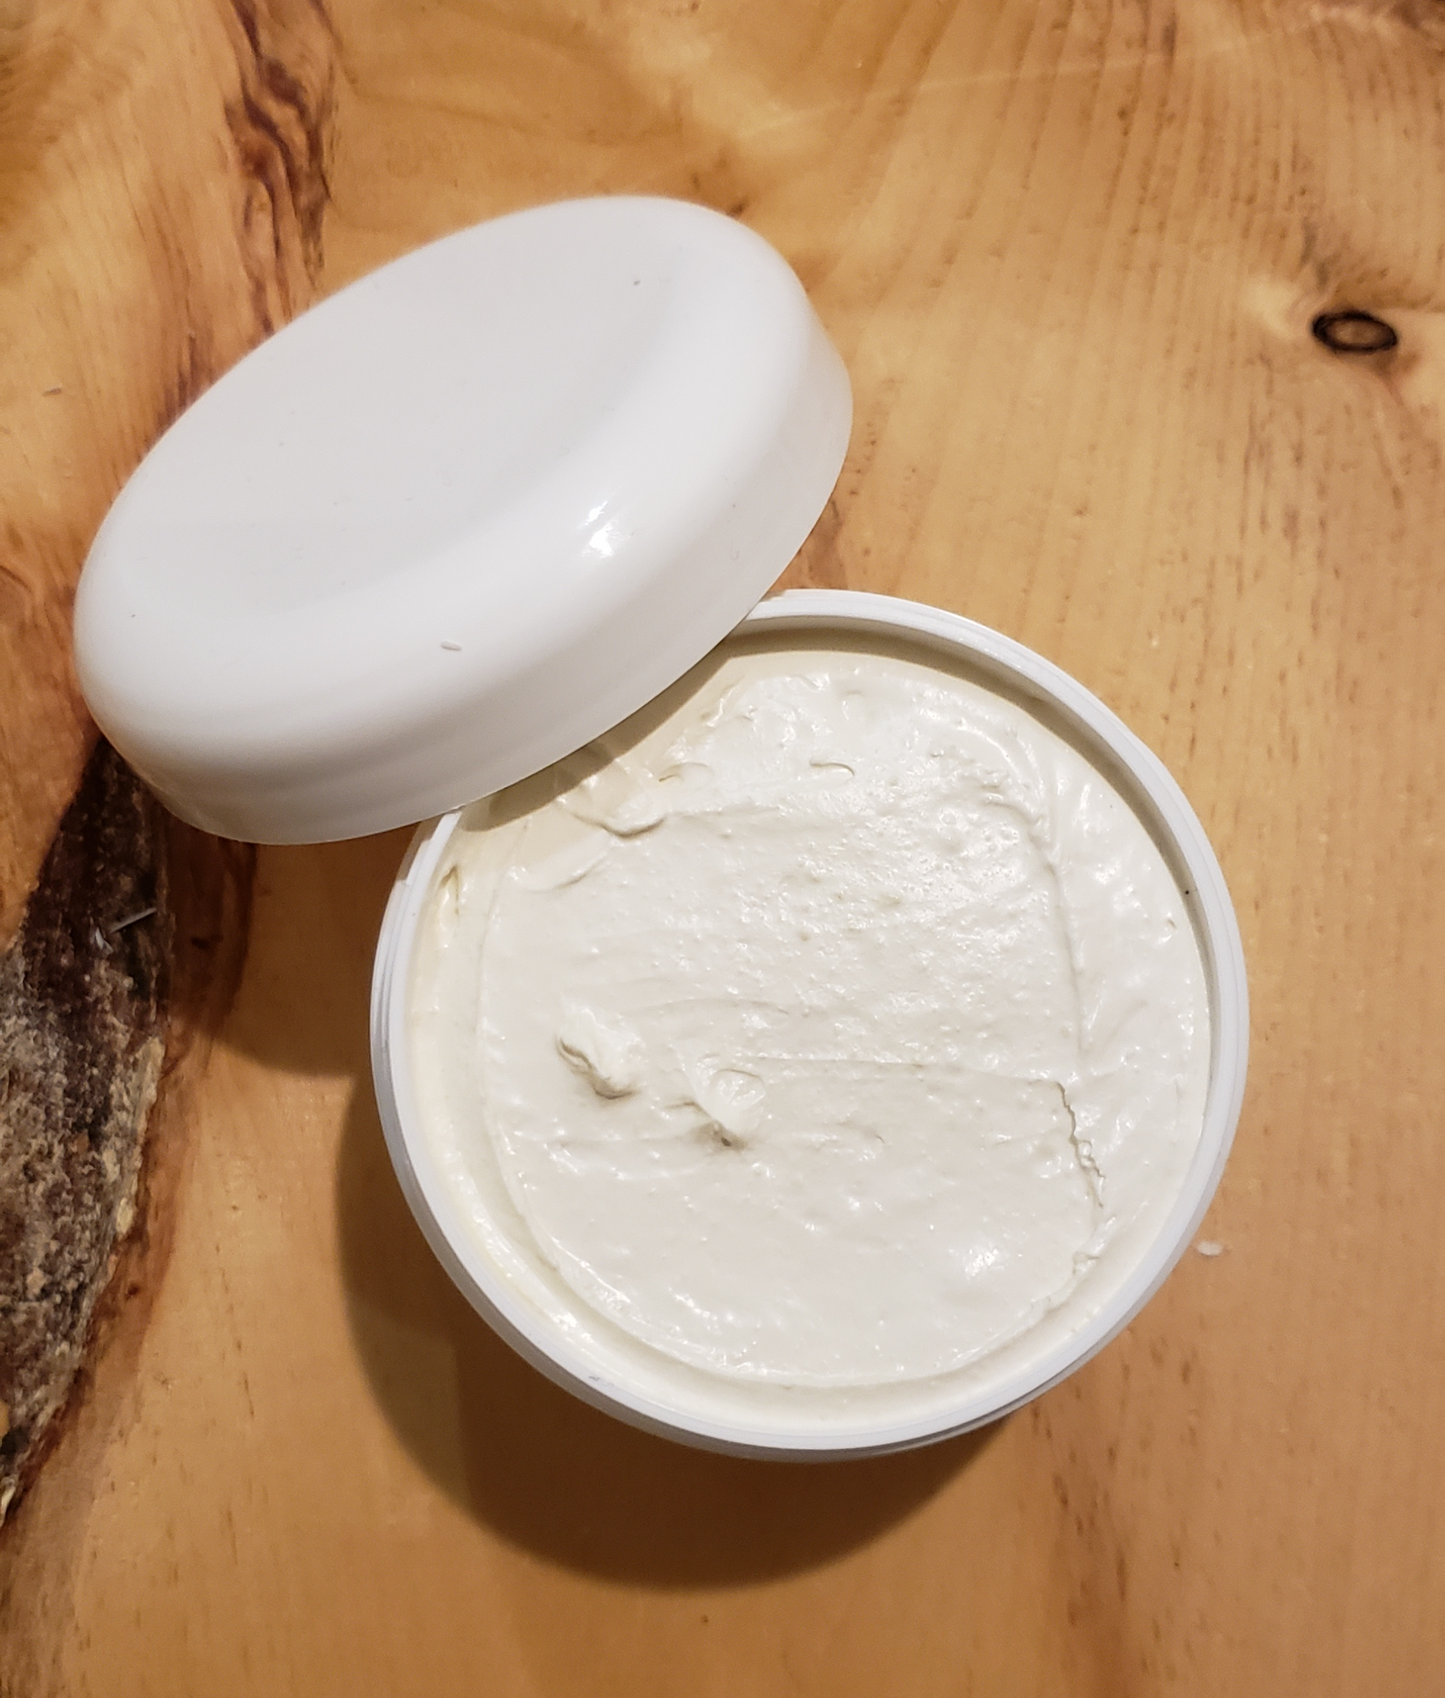 whipped body butter using shea butter, coconut oil and olive oil